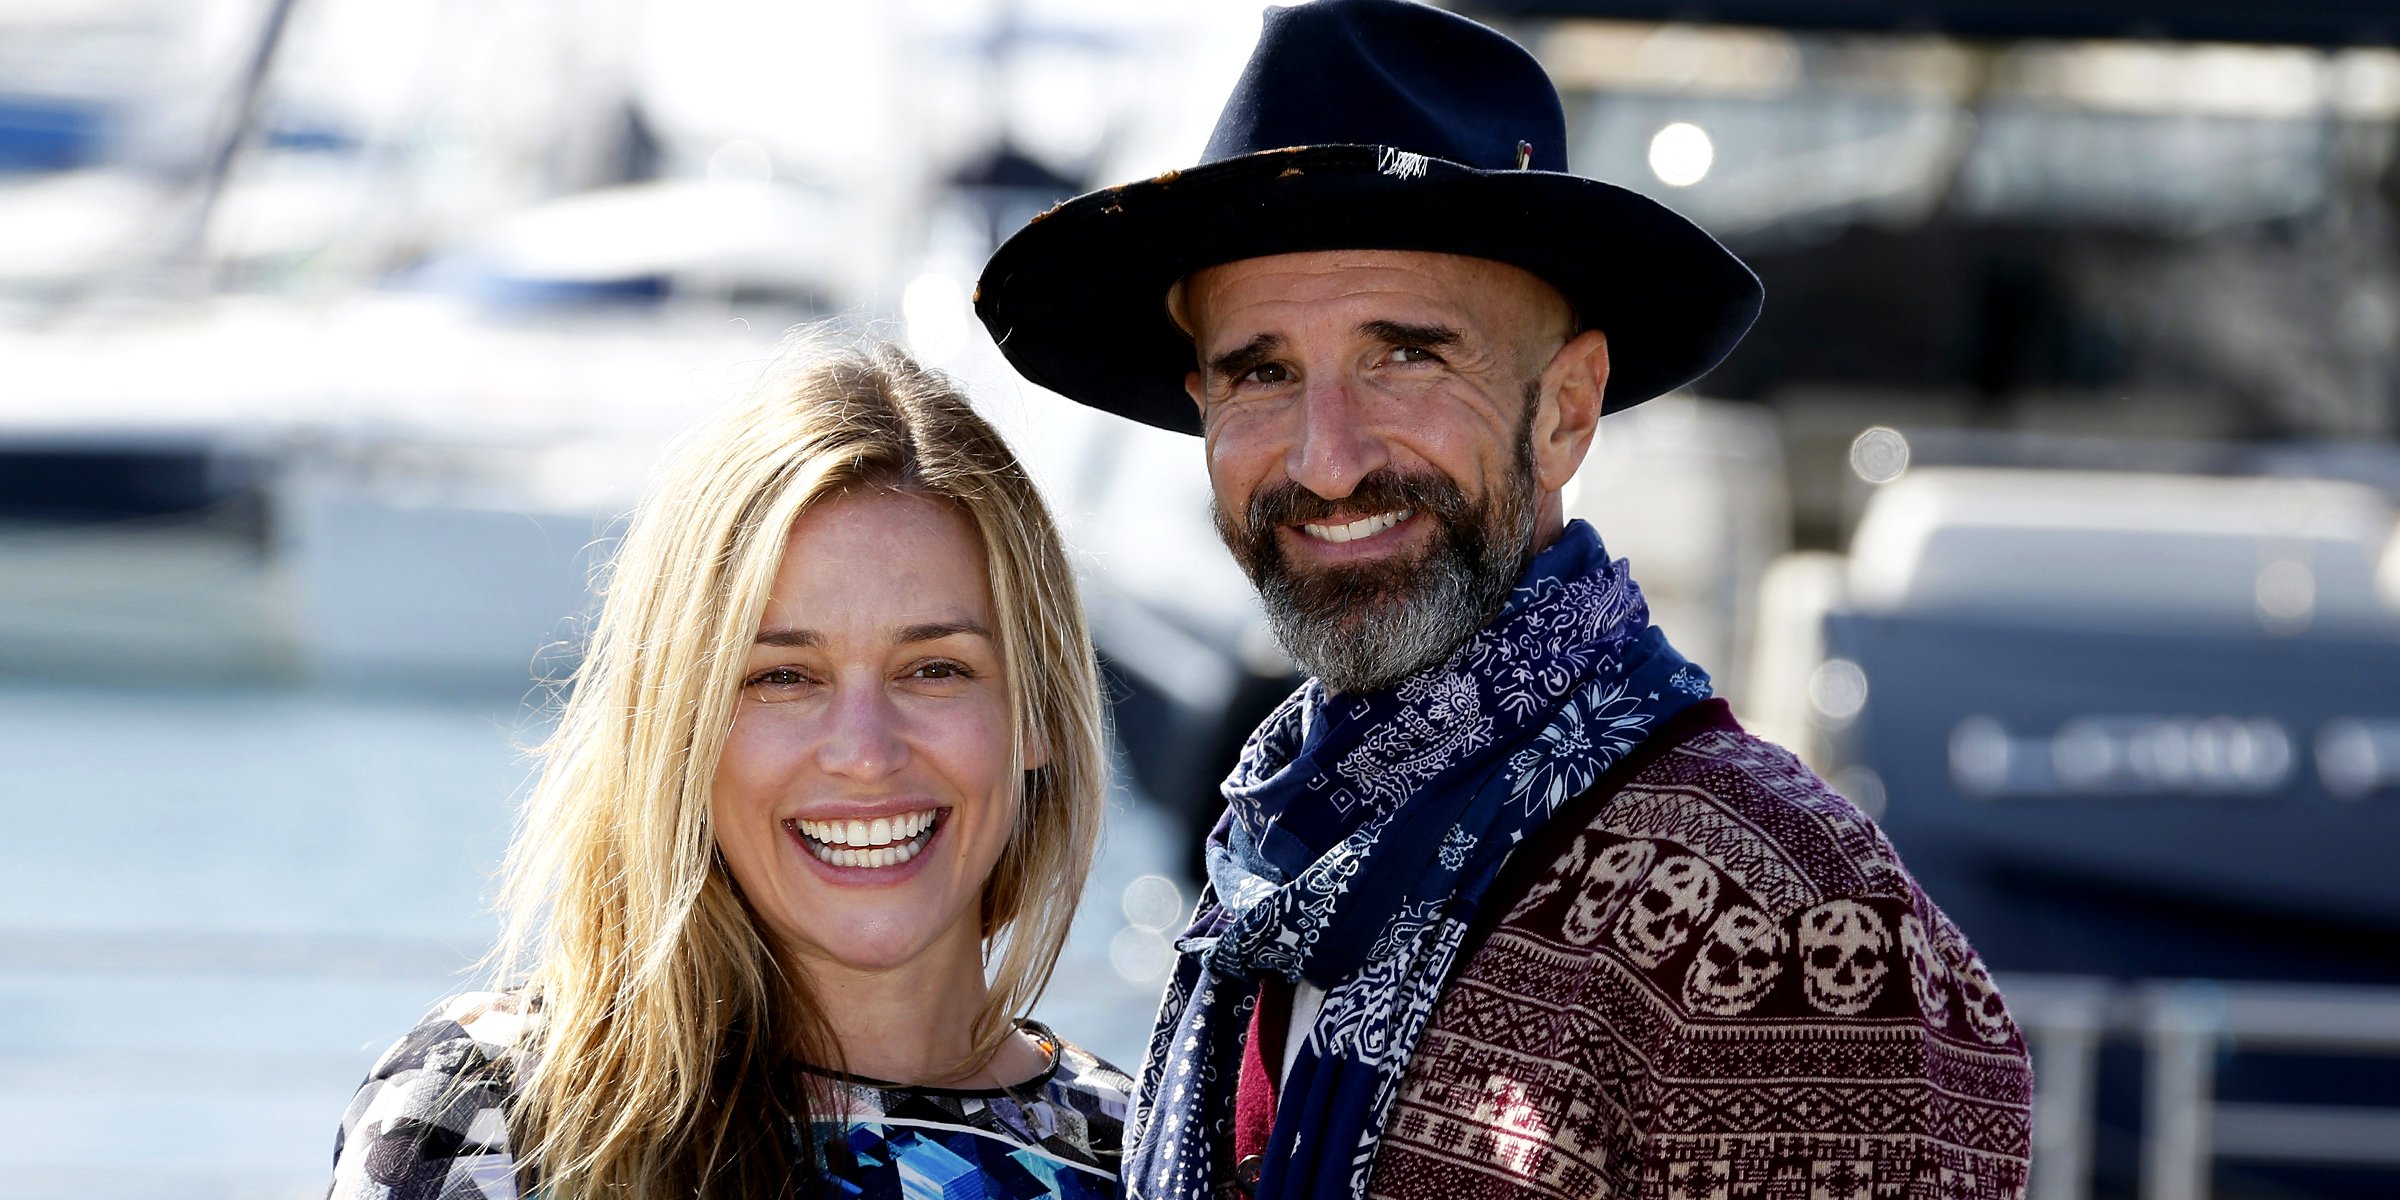 Stephen Kay and Piper Perabo | Source: Getty Images